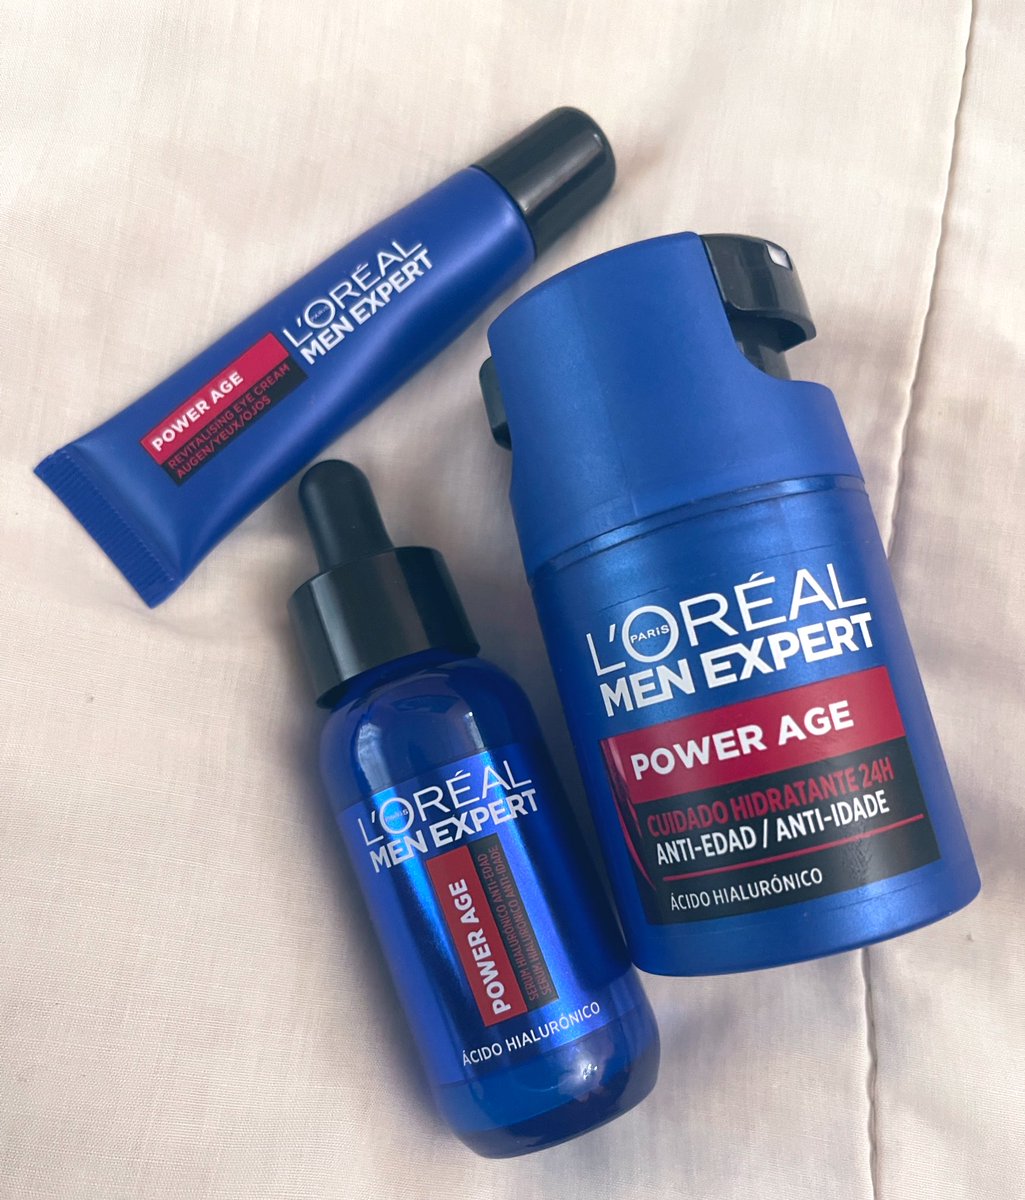 Since it’s the weekend, decided to do the entire serum+moisturiser+eye cream thingy…i think im having a relationship with my skincare routine🤭
#lorealmenexpert #powerage #antiaging